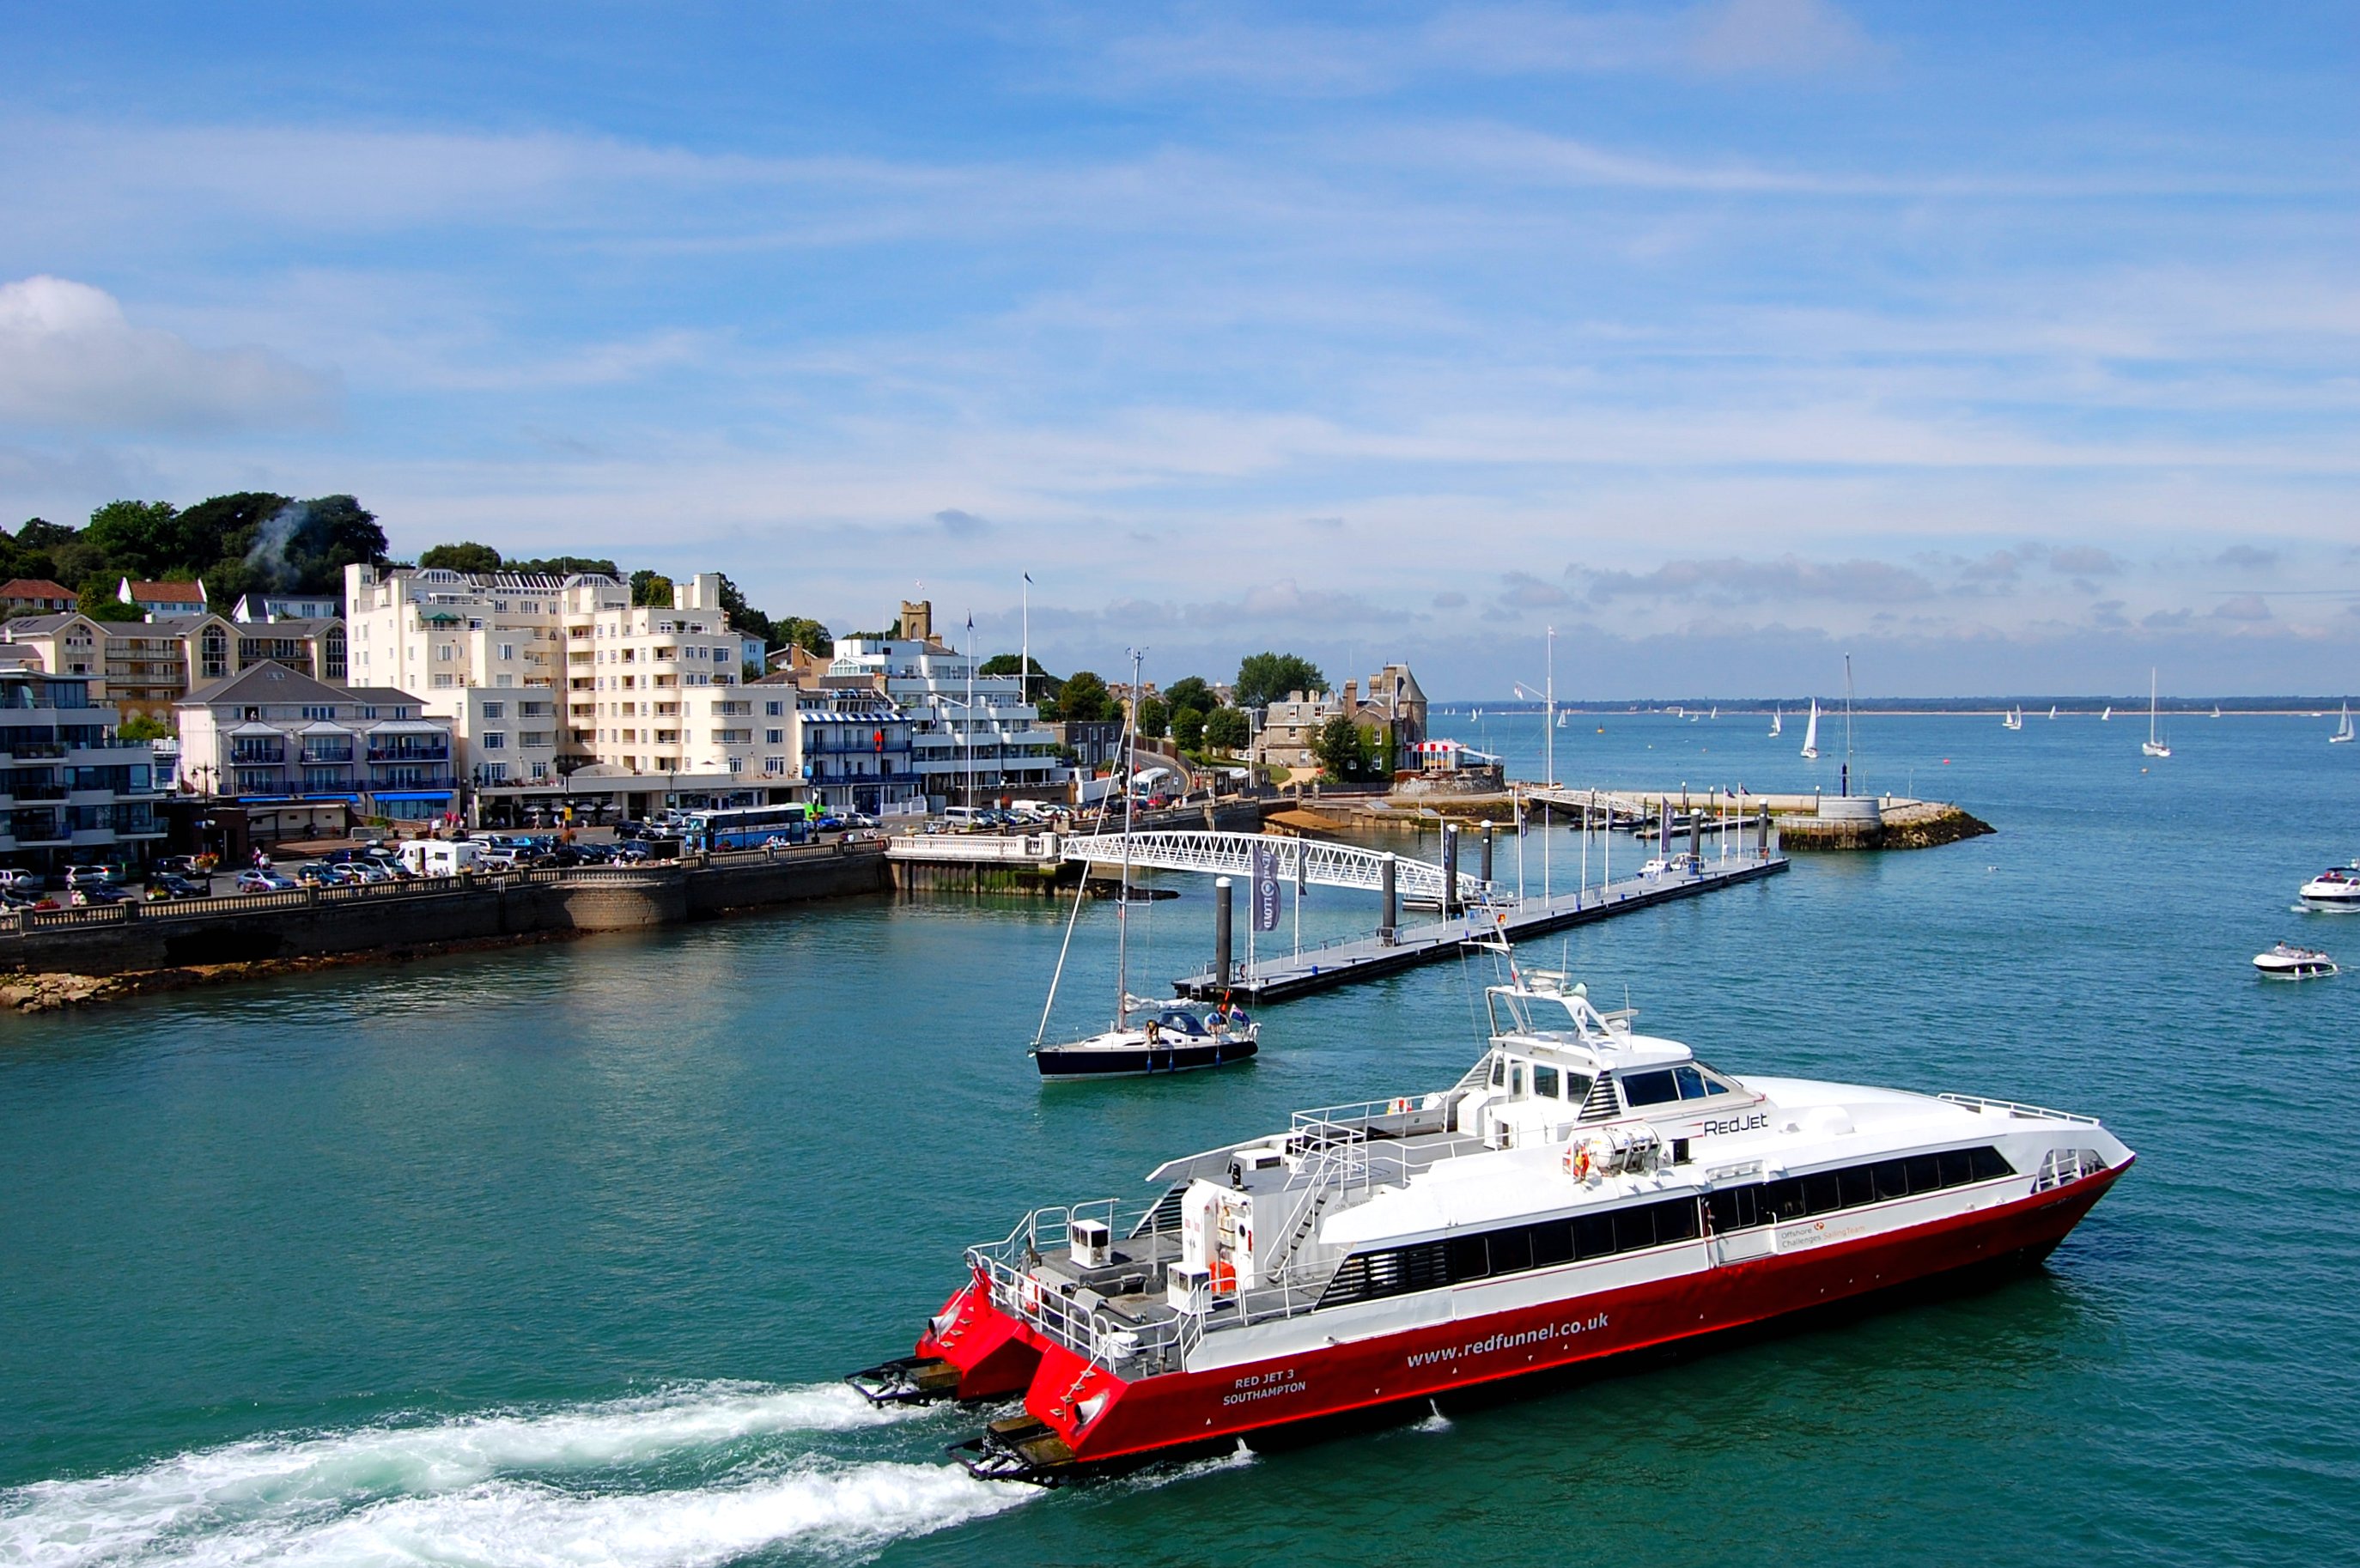 Red Funnel Wikipedia